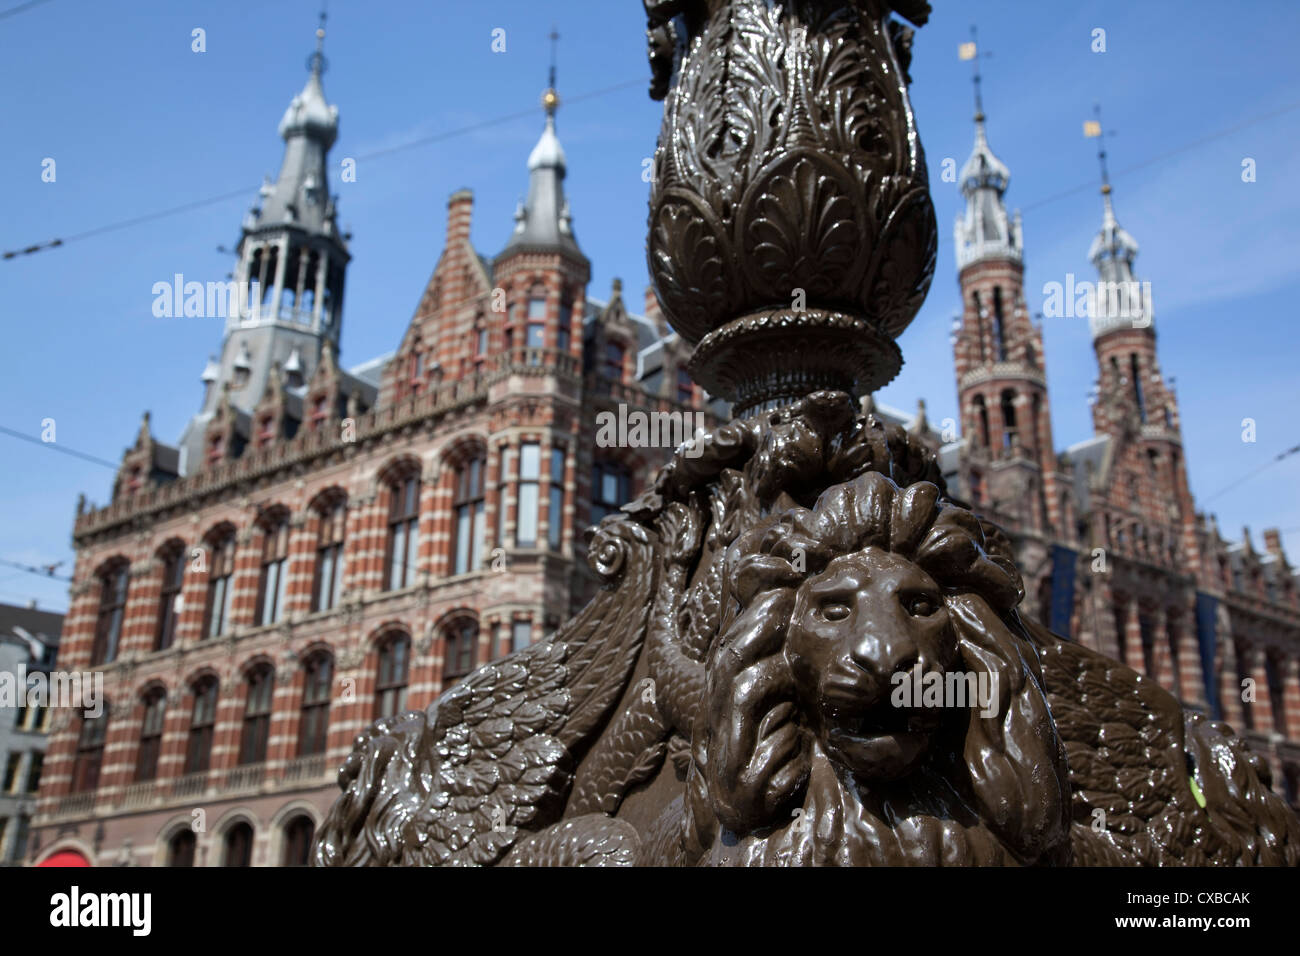 Magna Plaza and ornate lamp post, Amsterdam, Holland, Europe Stock Photo